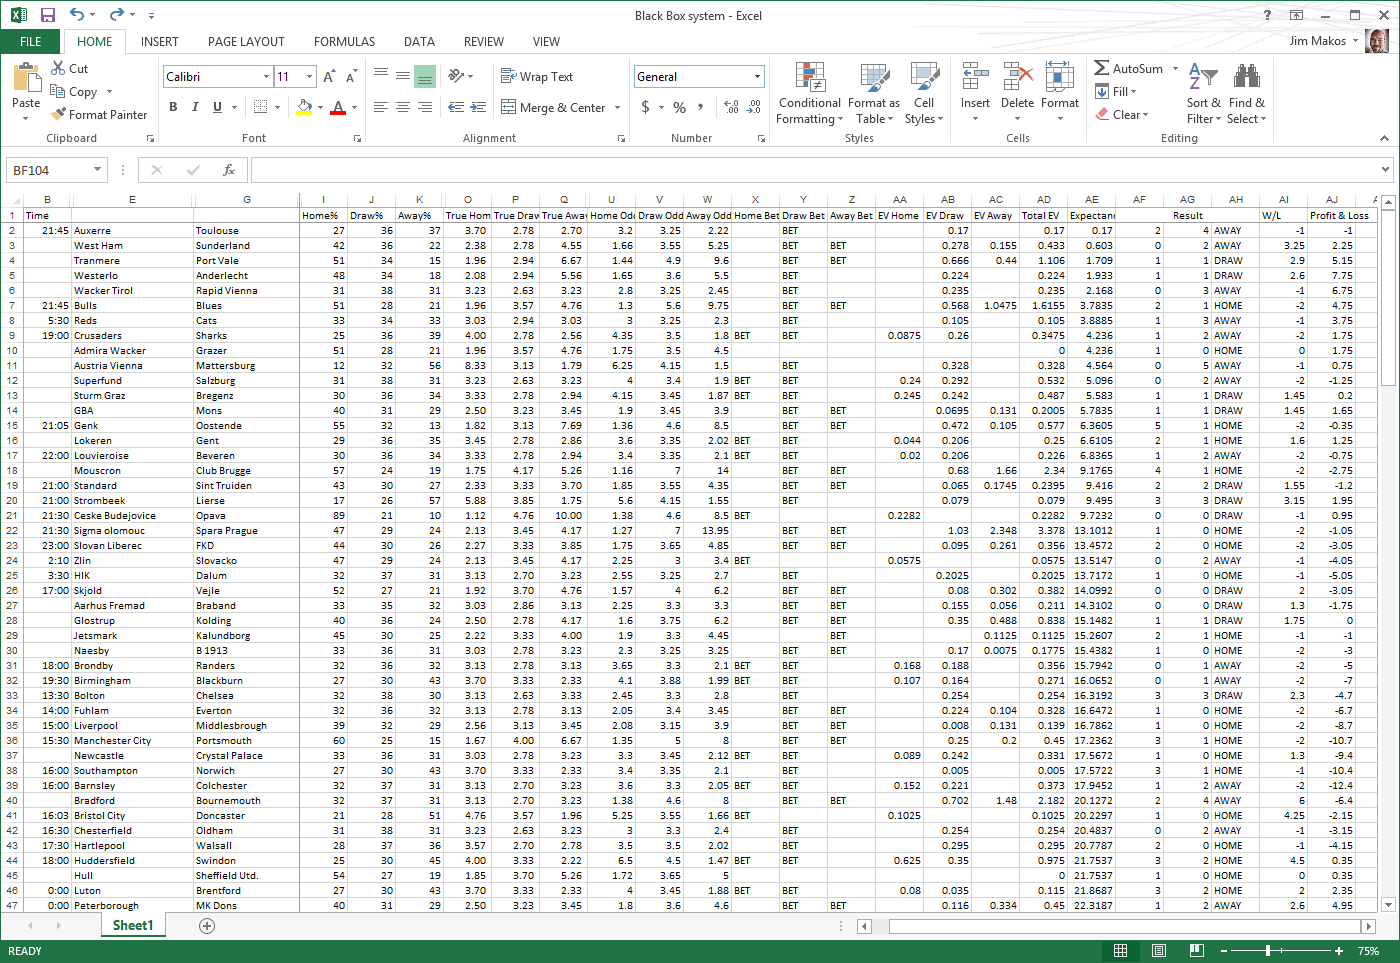 Poker Odds Spreadsheet For Keep Track Of Your Betting Performance With An Excel Spreadsheet